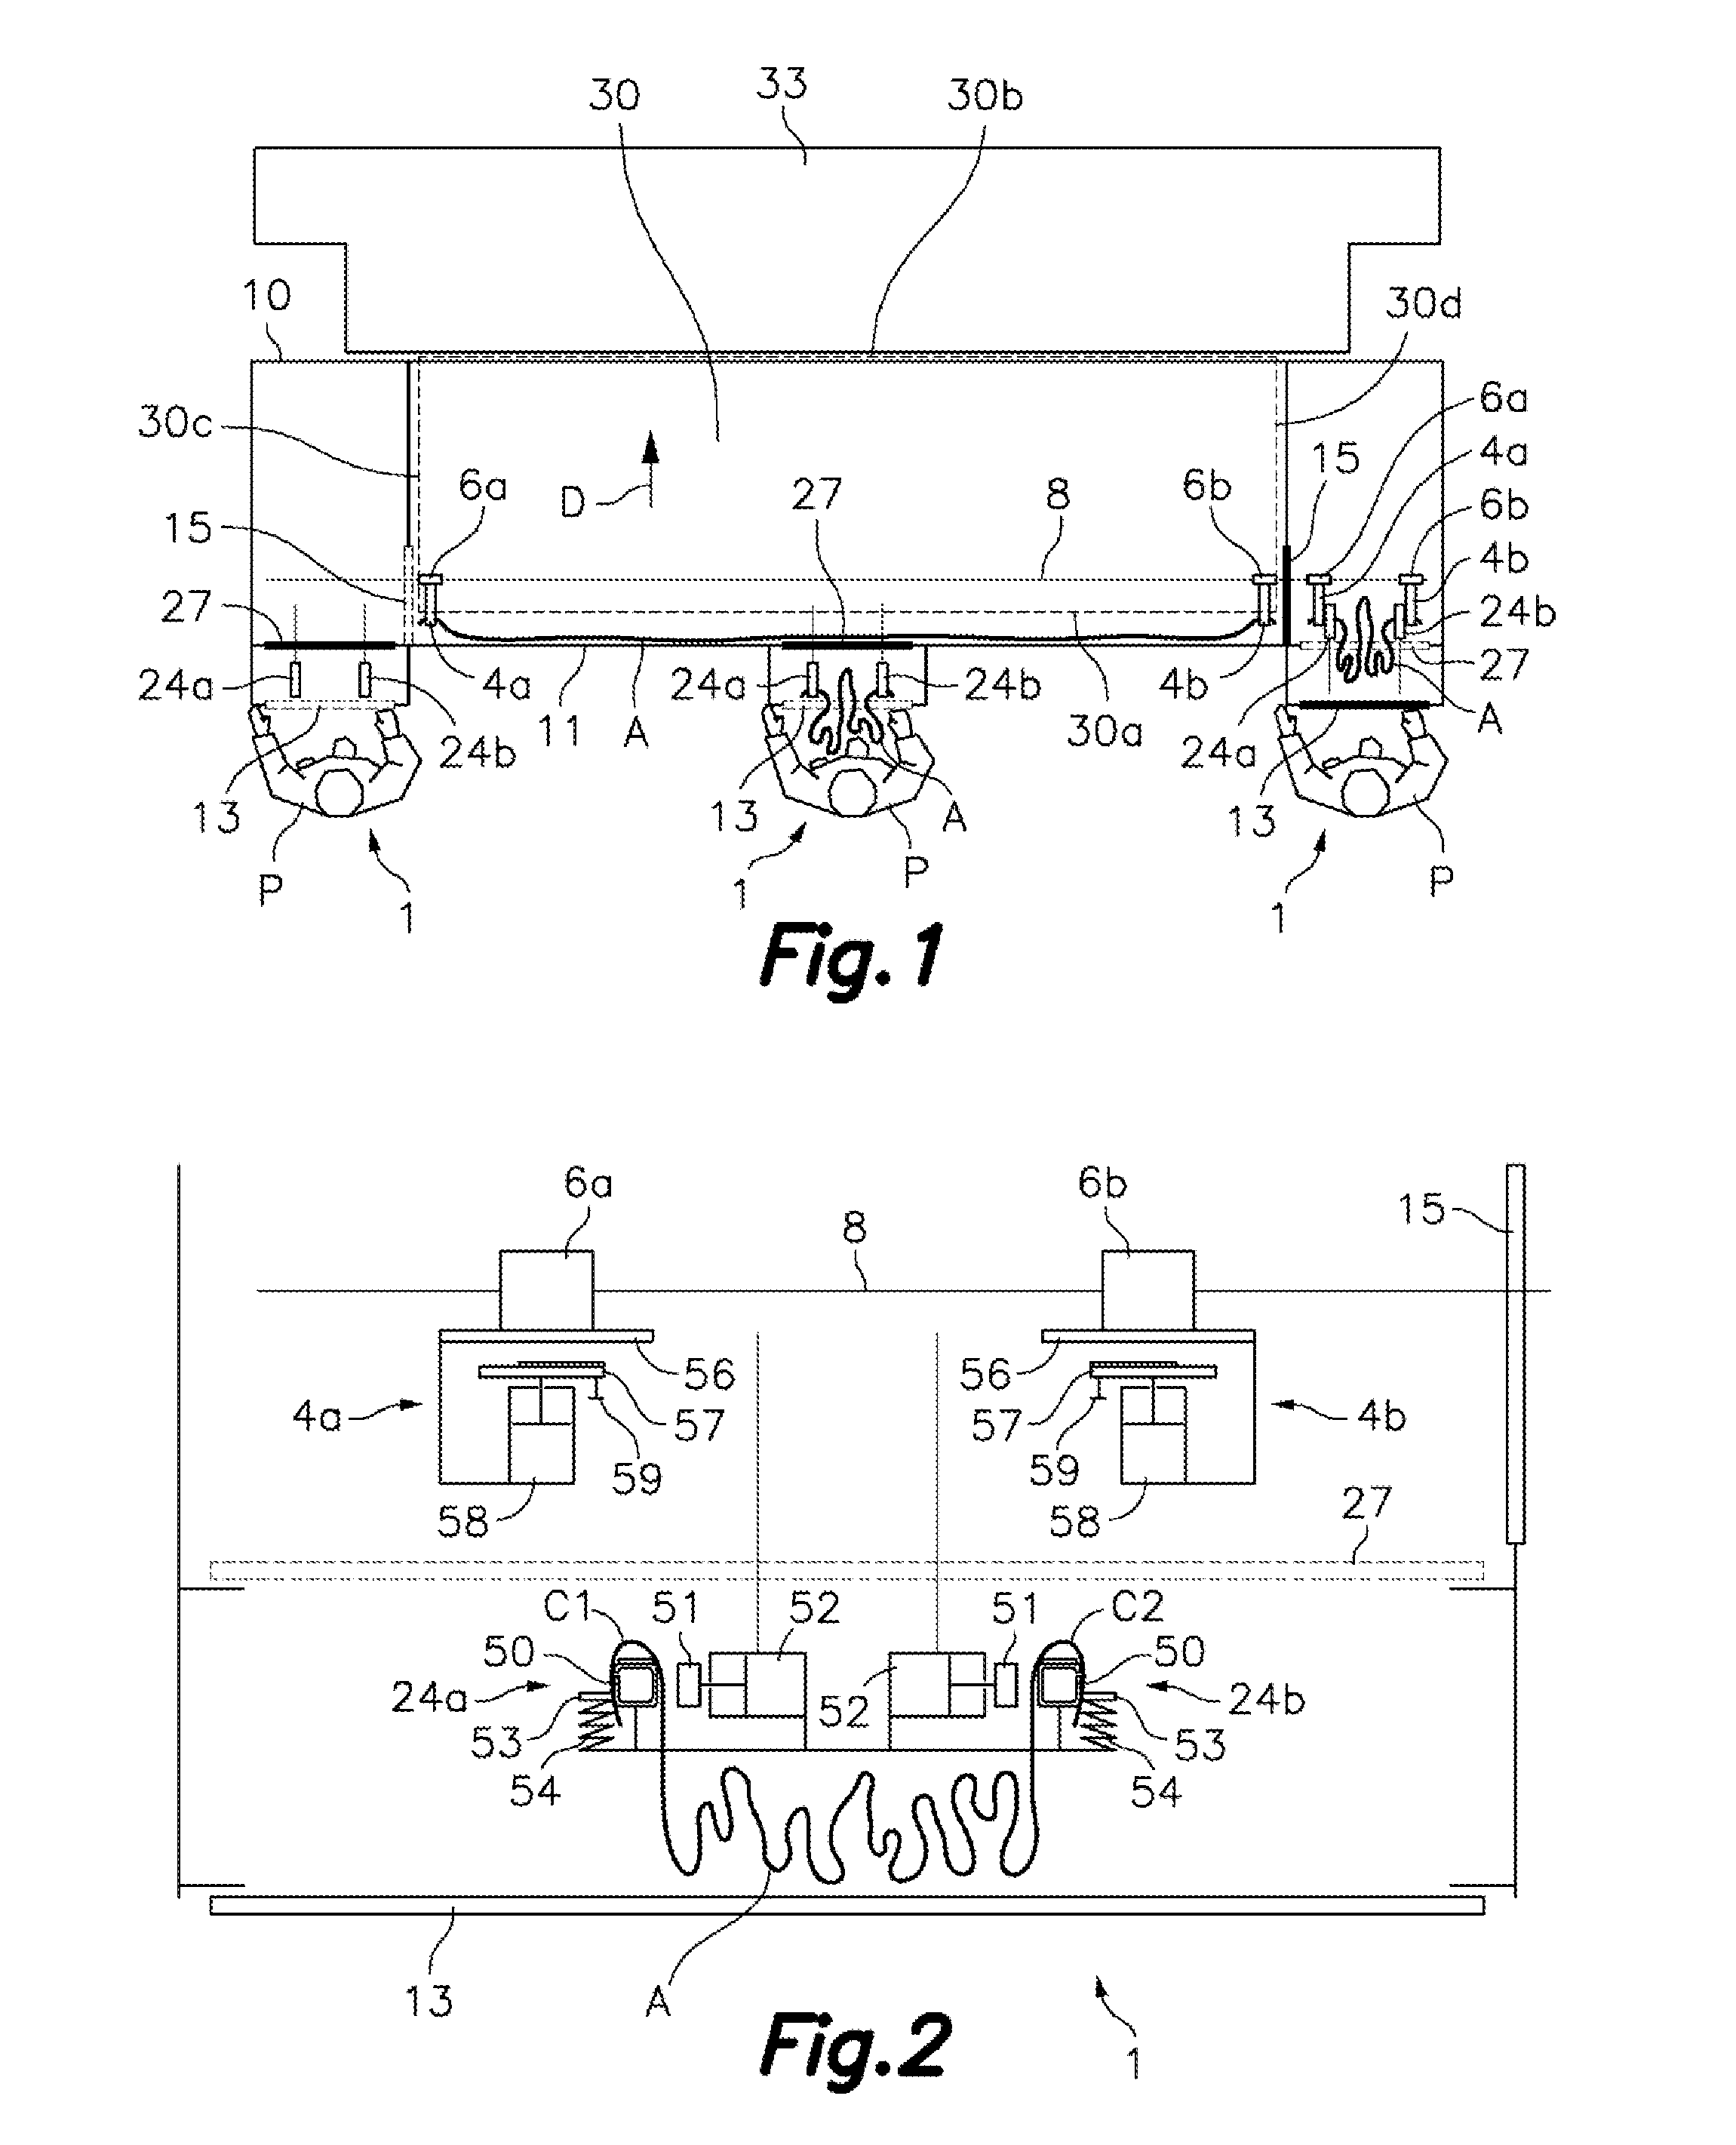 Machine for spreading out and loading flat clothing articles